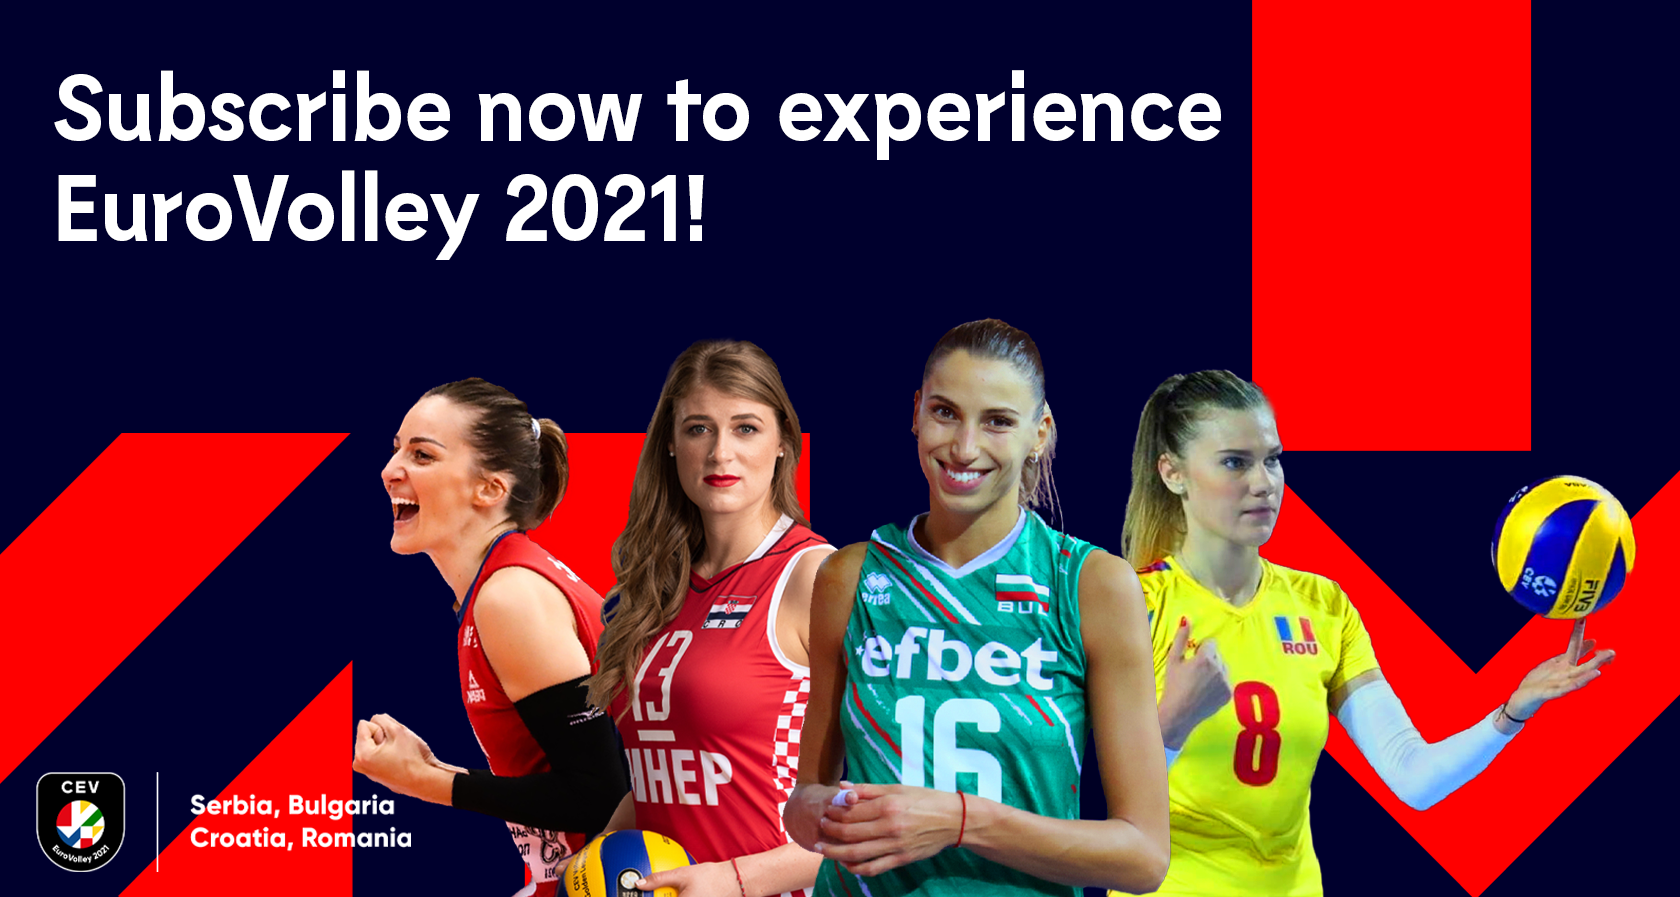 cev eurovolley 2021 women subscription package now available on eurovolley tv eurovolley